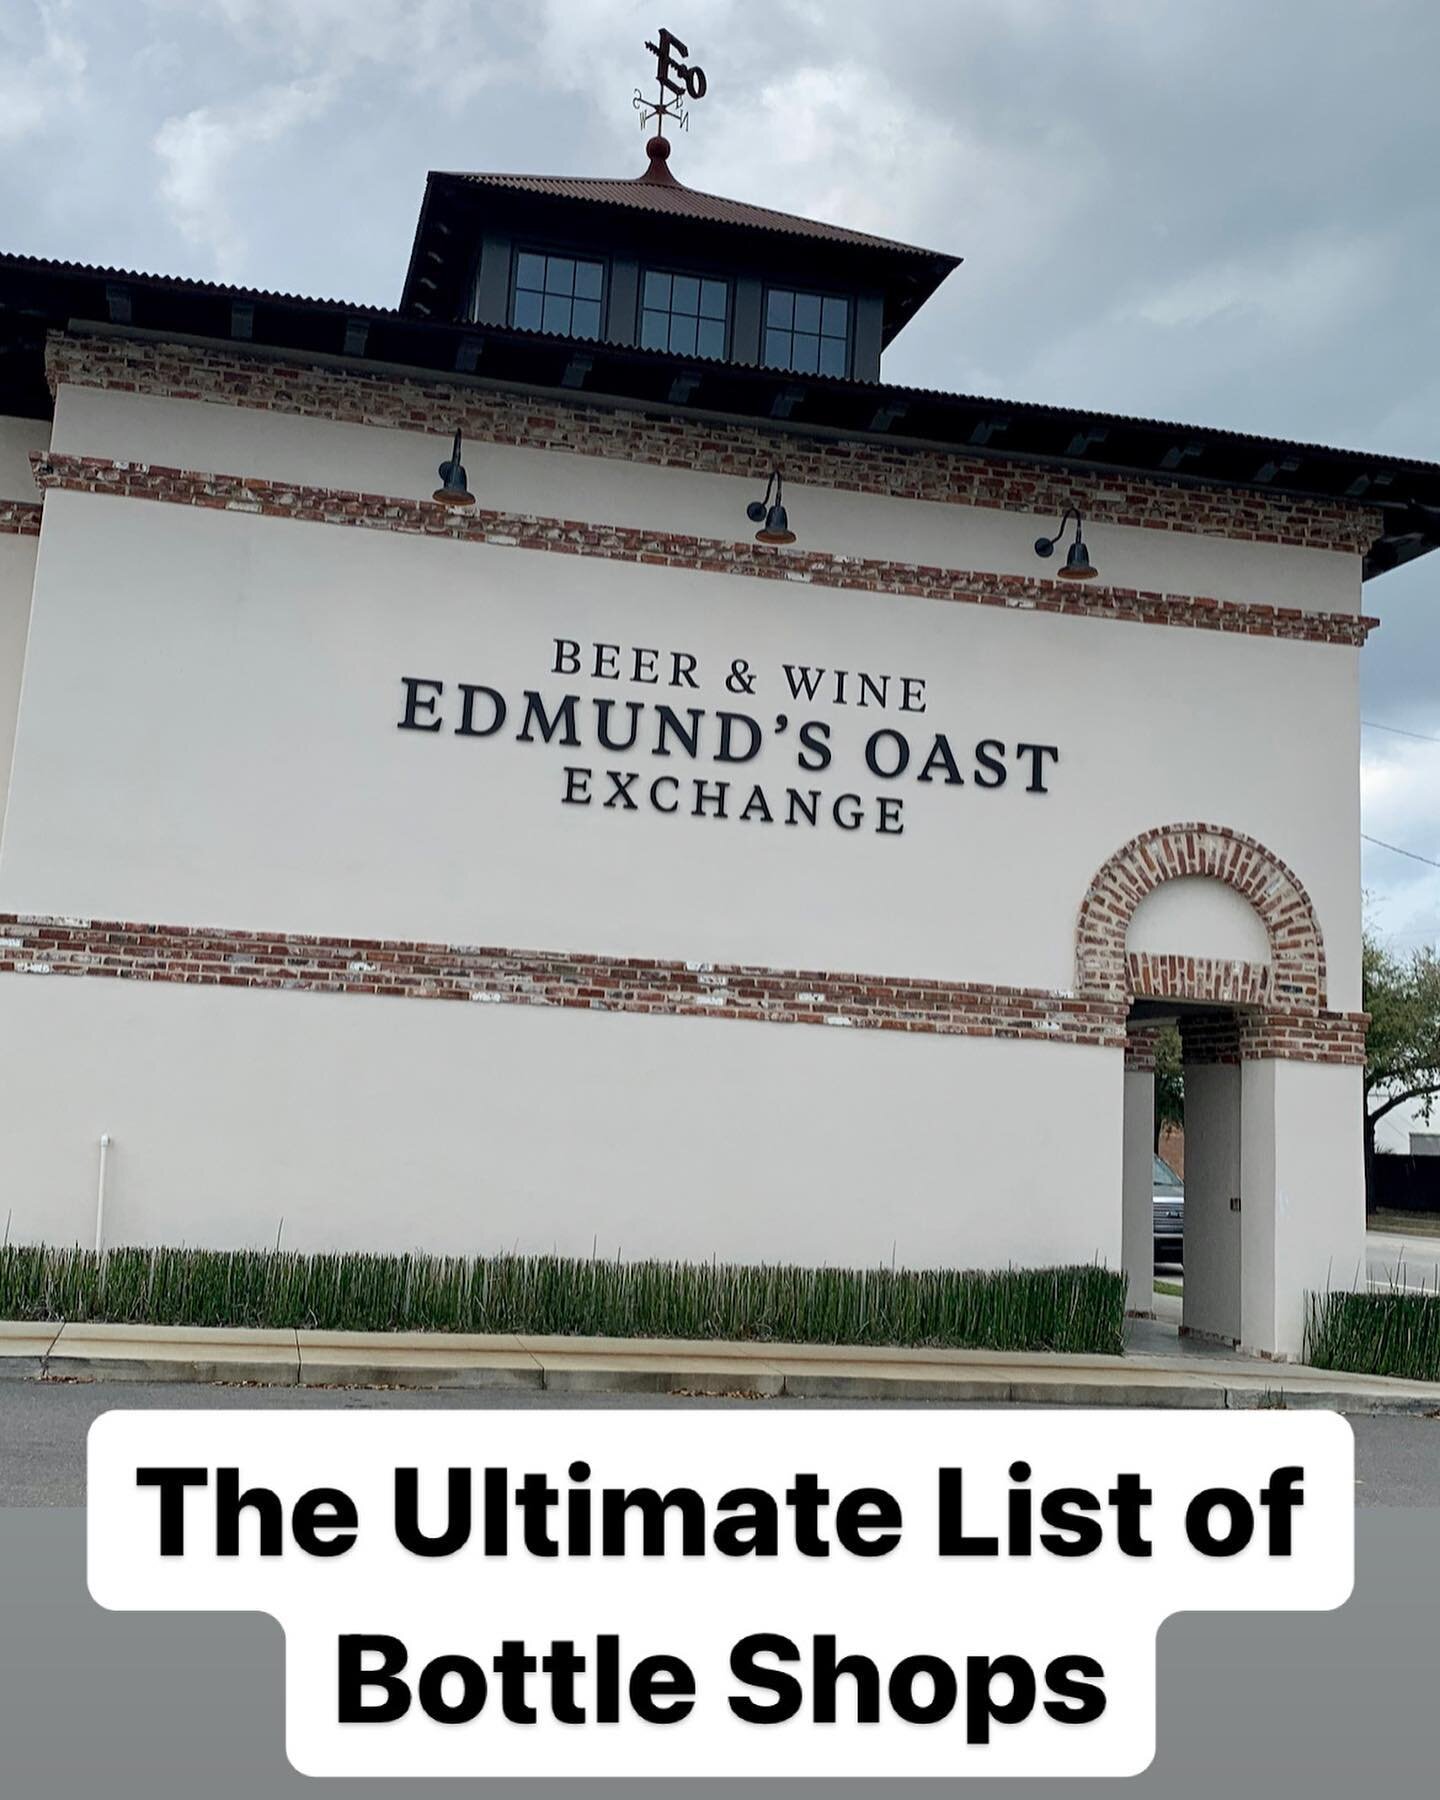 The Ultimate List of Bottle Shops and great stops to buy things to go in the Charleston Area. 🔗 Link in Bio 🍻🥂

⠀⠀⠀⠀⠀⠀⠀⠀⠀
⠀⠀⠀⠀⠀⠀⠀⠀⠀
⠀⠀⠀⠀⠀⠀⠀⠀⠀
⠀⠀⠀⠀⠀⠀⠀⠀⠀
⠀⠀⠀⠀⠀⠀⠀⠀⠀
⠀⠀⠀⠀⠀#MyPleasantCity #MyPleasant #Sips #Charleston #MountPleasant #MtP #ExploreCharle